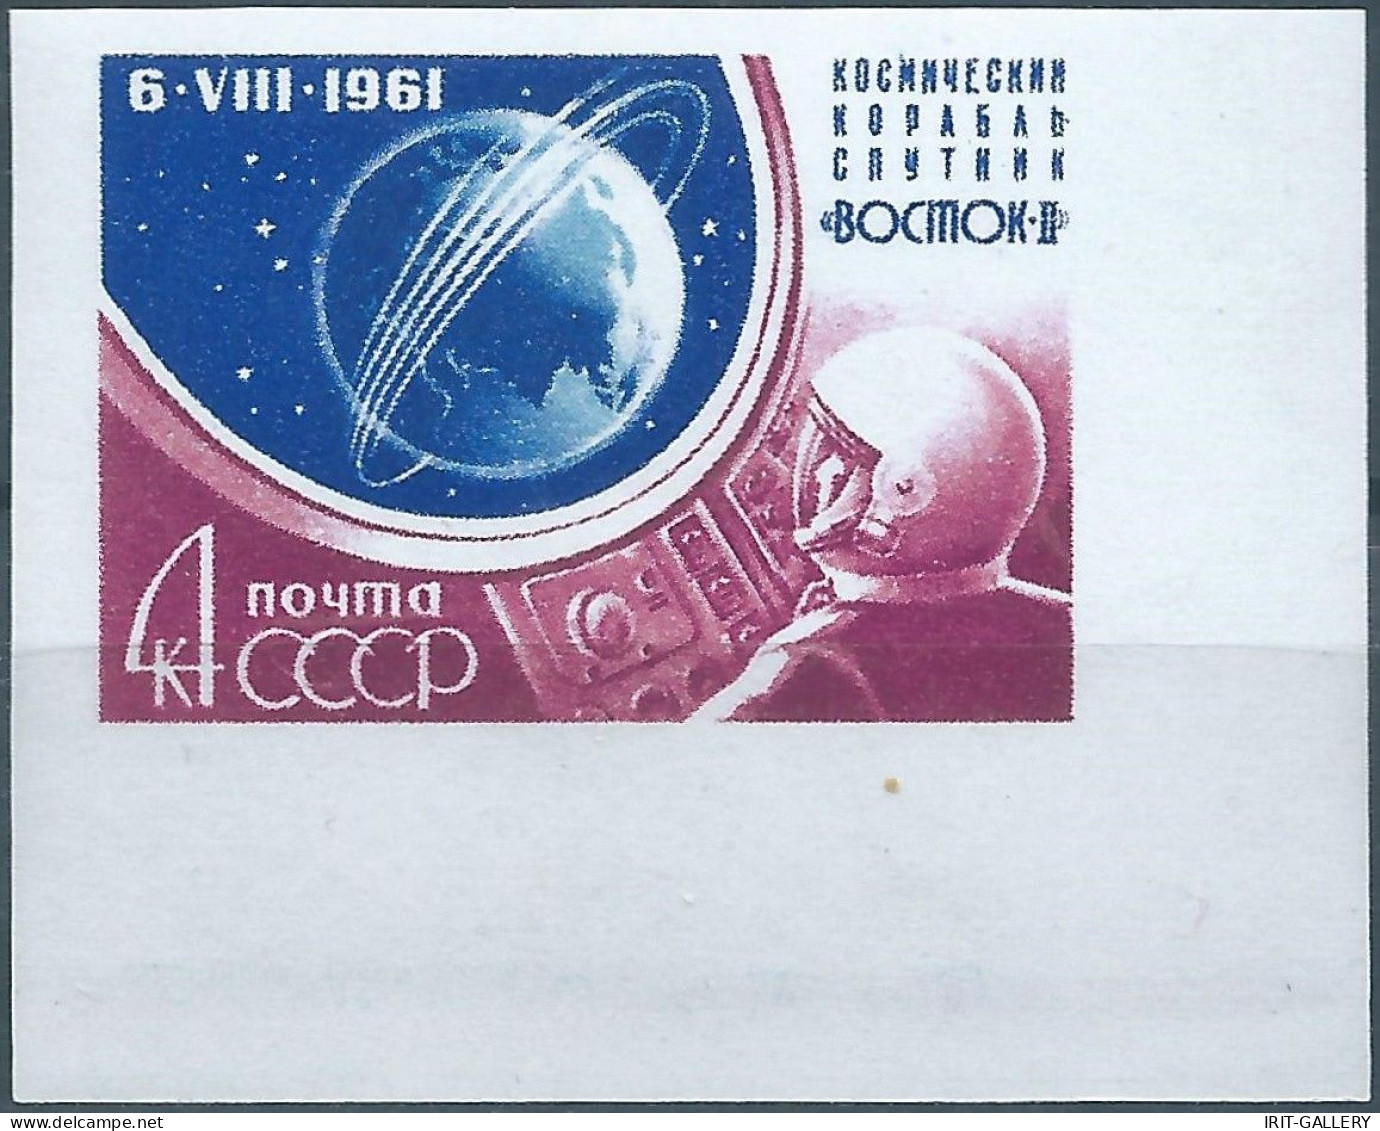 Russia-Union Of Soviet-CCCP,1961 The Second Manned Space Flight,IMPERF,Mint - Russia & USSR